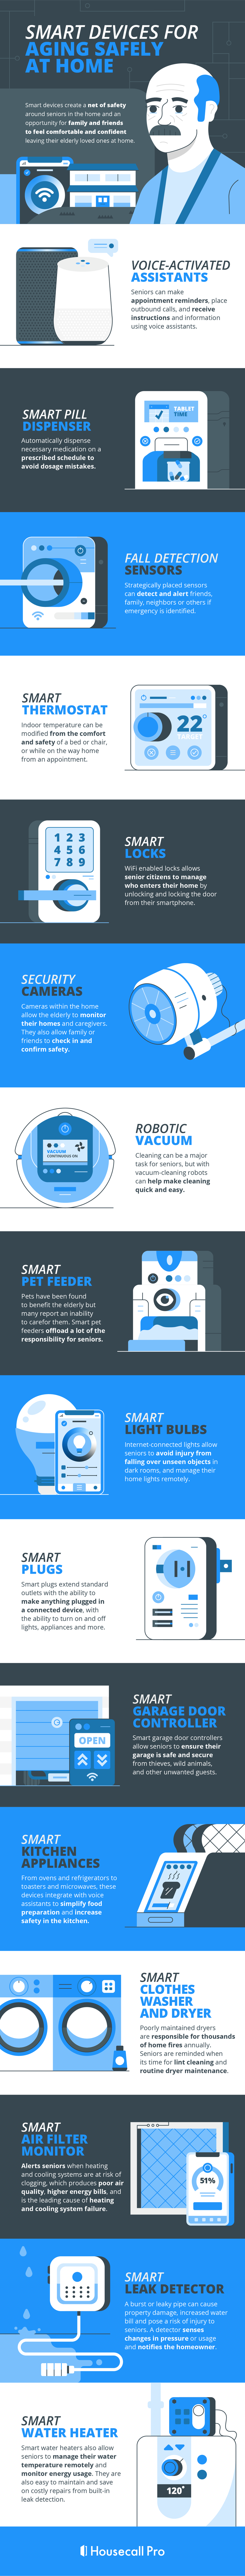 infographic featuring 16 smart home devices for senior citizen safety